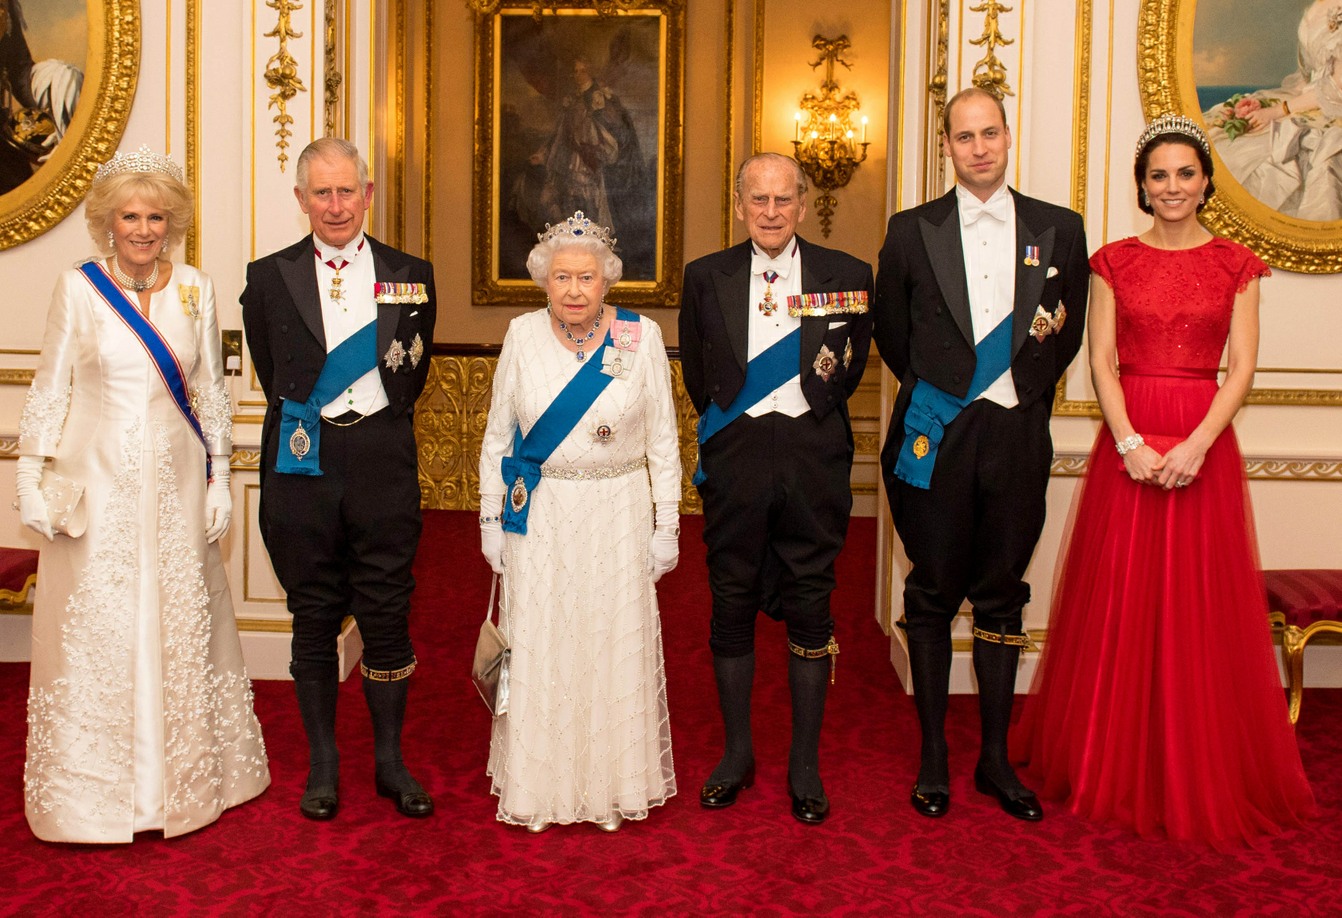 The Duchess of Cornwall, the Prince of Wales, Queen Elizabeth II, the Duke of Edinburgh and the Duke and Duchess of Cambridge attend the Diplomatic Corps reception at Buckingham Palace